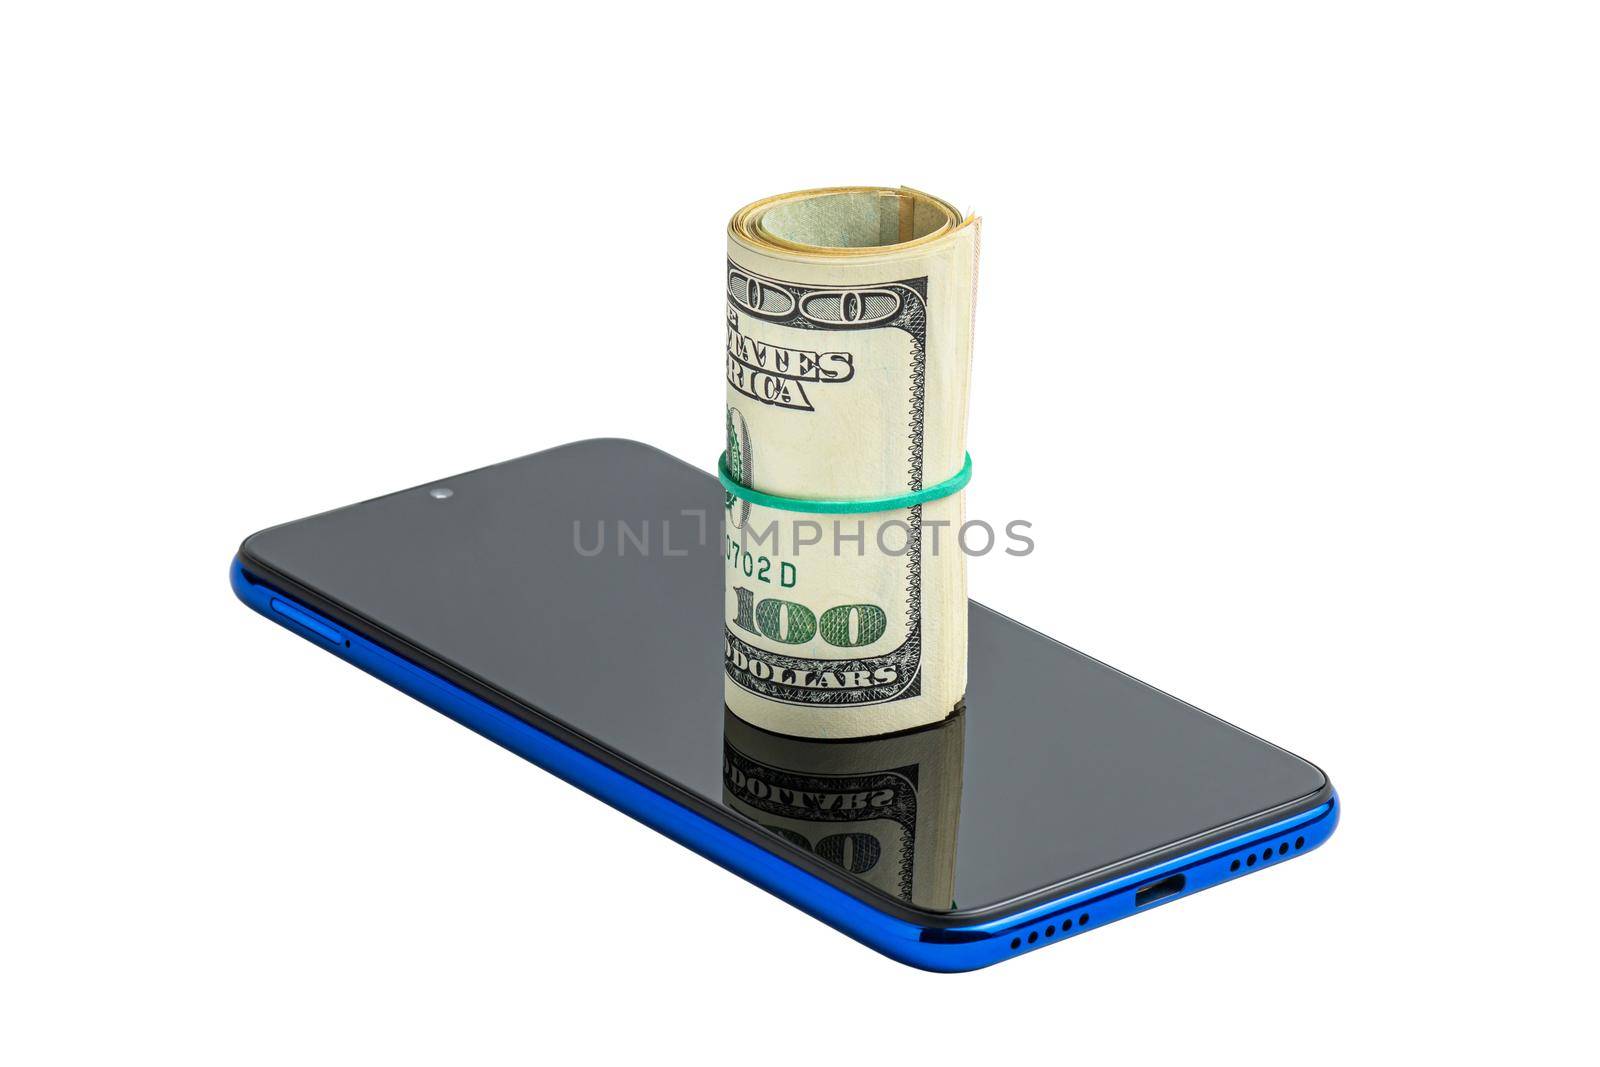 Money in a roll, tied with an elastic band, on the phone. The isolated object on a white background. U.S. dollars. Phone and dollars isolated on white.